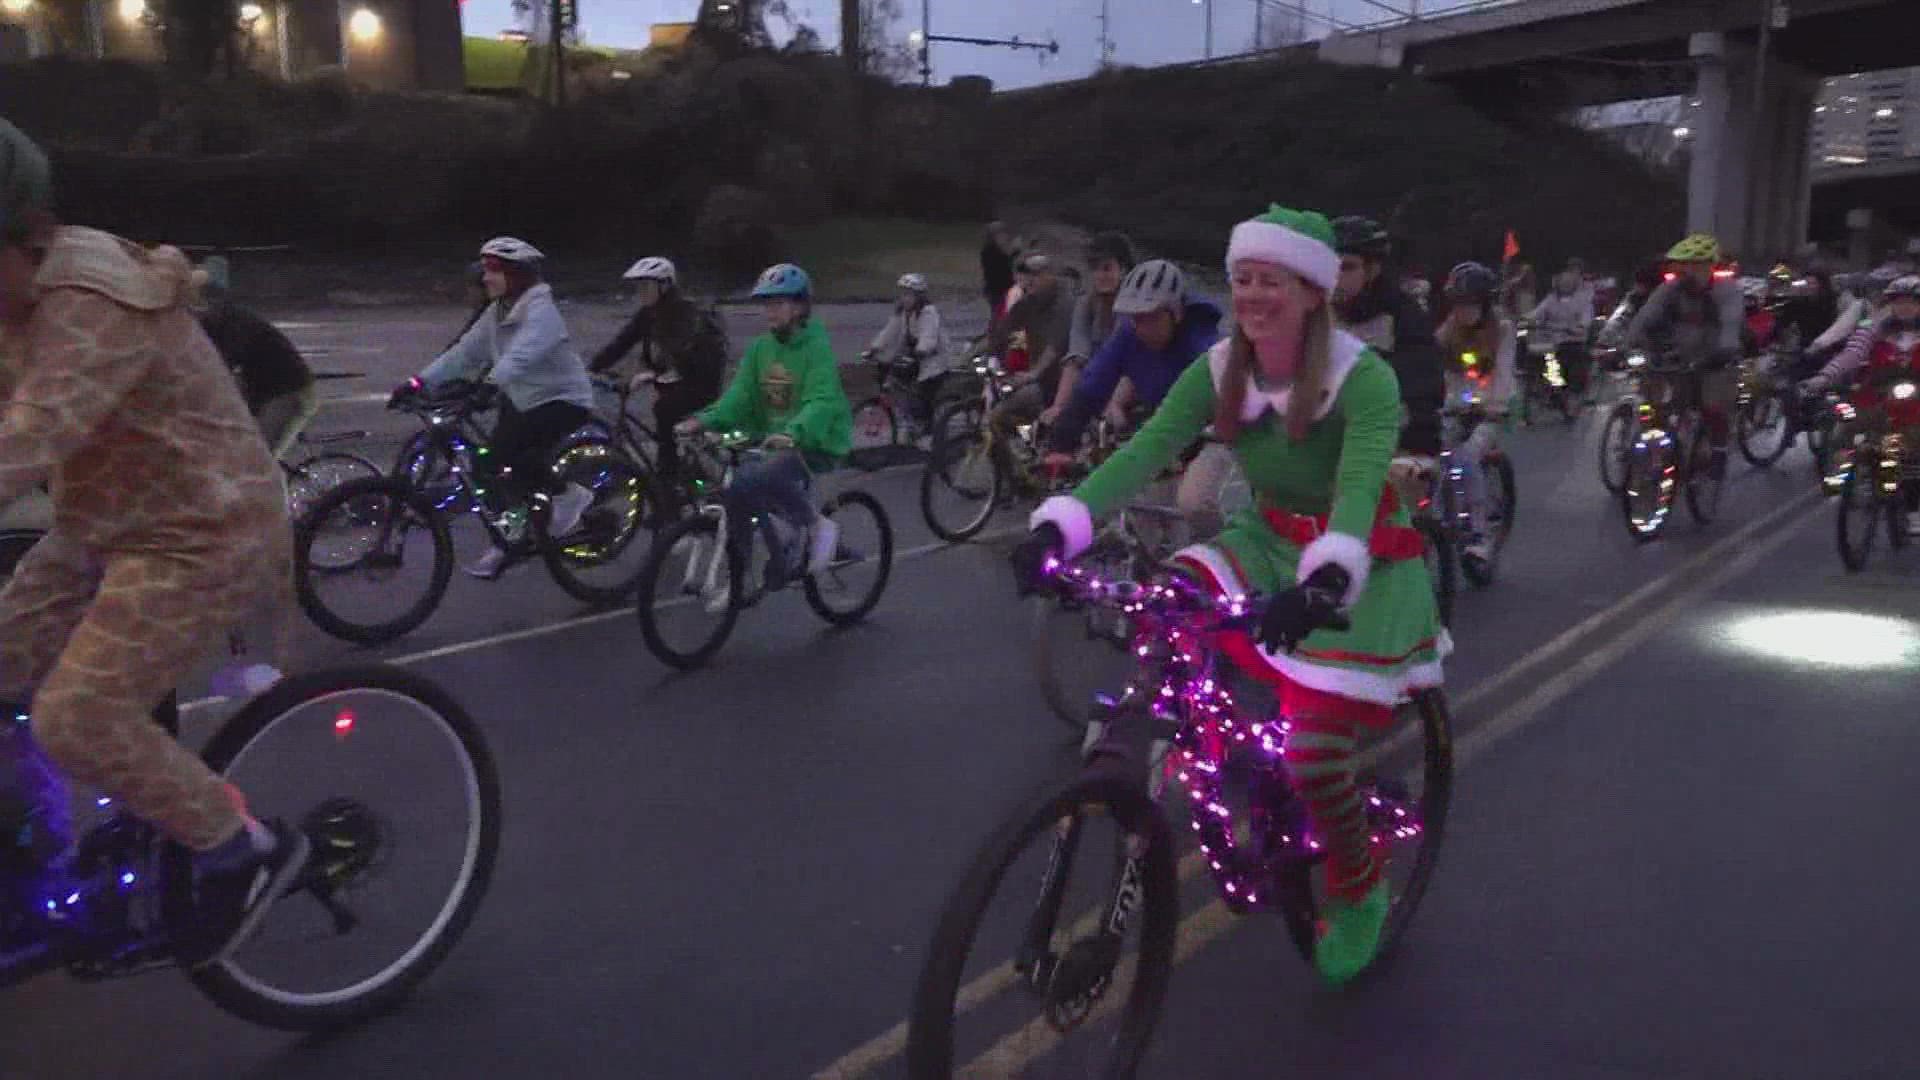 Knoxville's annual "Tour de Lights" bike ride will return over the weekend. Participants are encouraged to wear holiday gear and decorate their bikes.